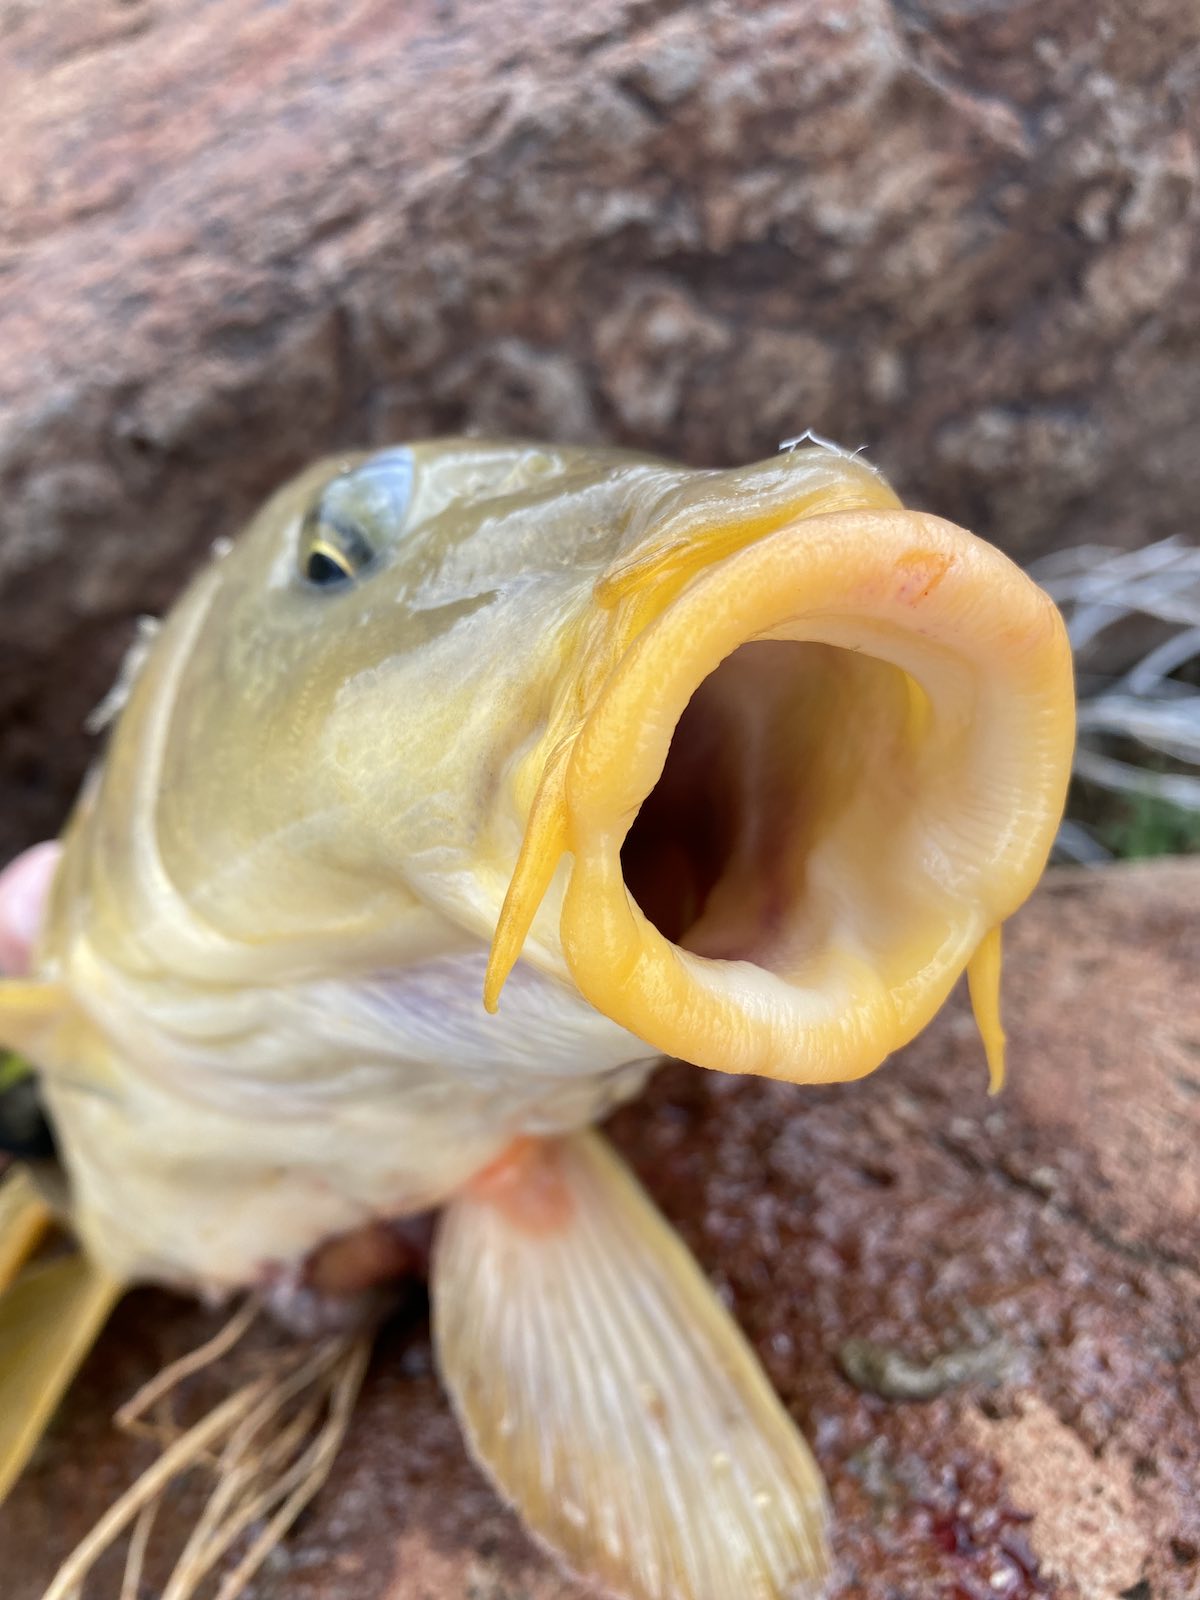 Huge common carp mouth